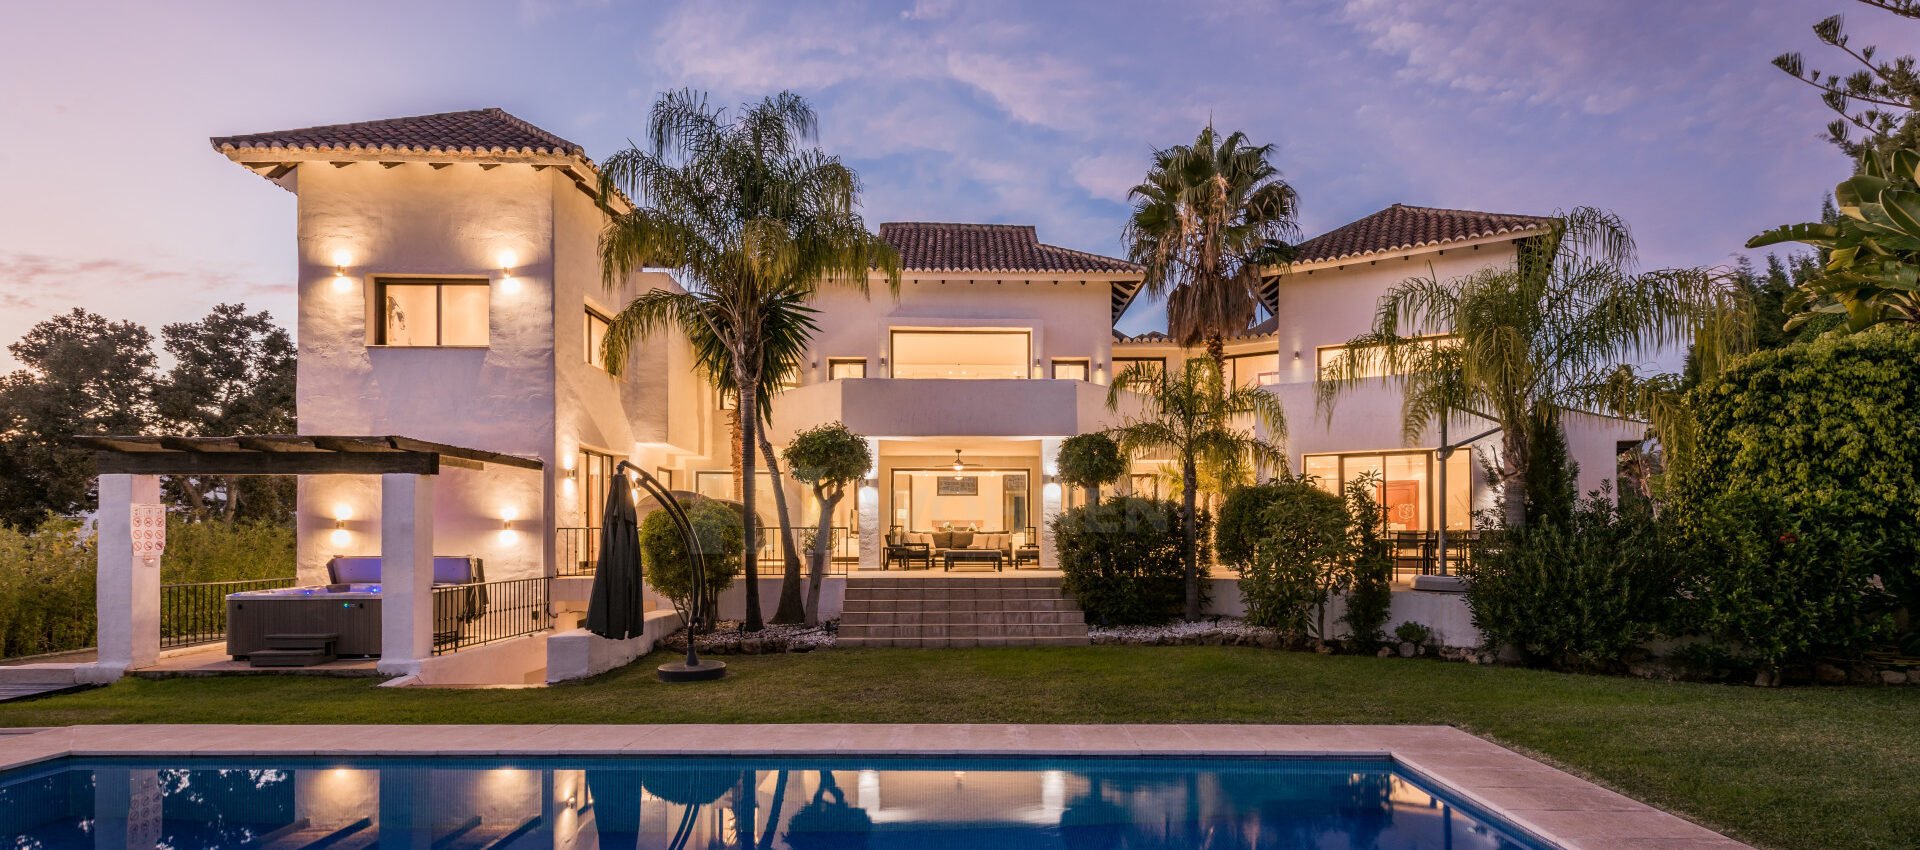 Mediterranean style villa within one of the most exclusive urbanizations on the Golden Mile